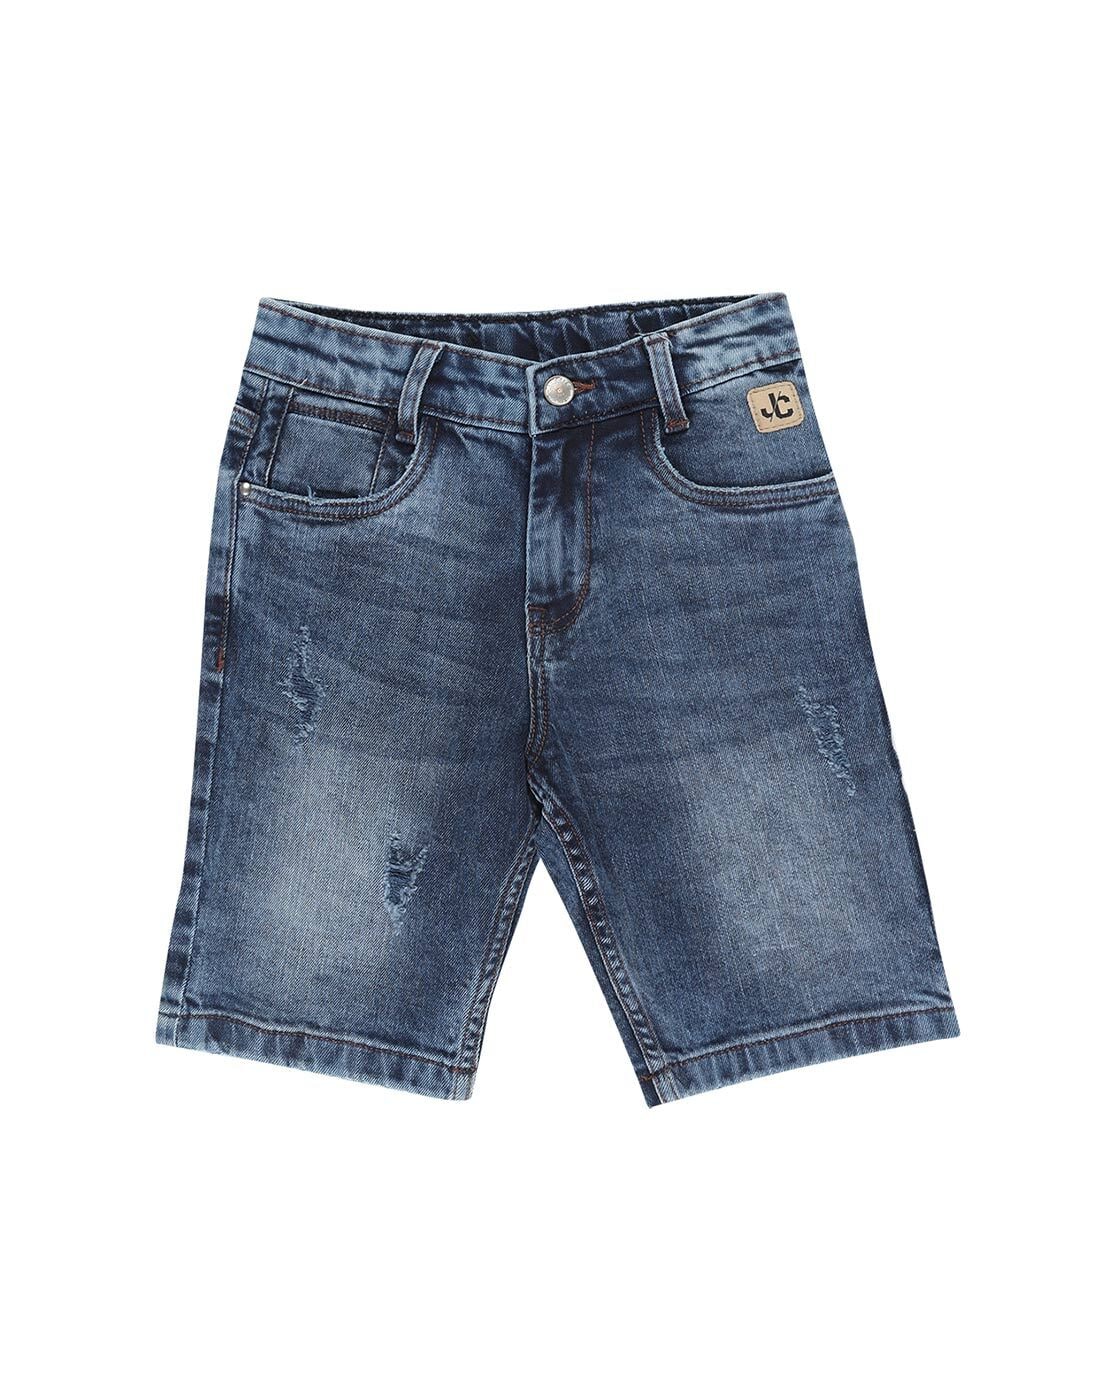 Buy Pack of 2 Denim Shorts Boy's Regular Fit Casual Boxer Bermuda Stylish  Denim Pants for Kids with Drawstring Pockets Baby Boy Half Pant |Blue,  Navy|12-18 Months Online at Best Prices in